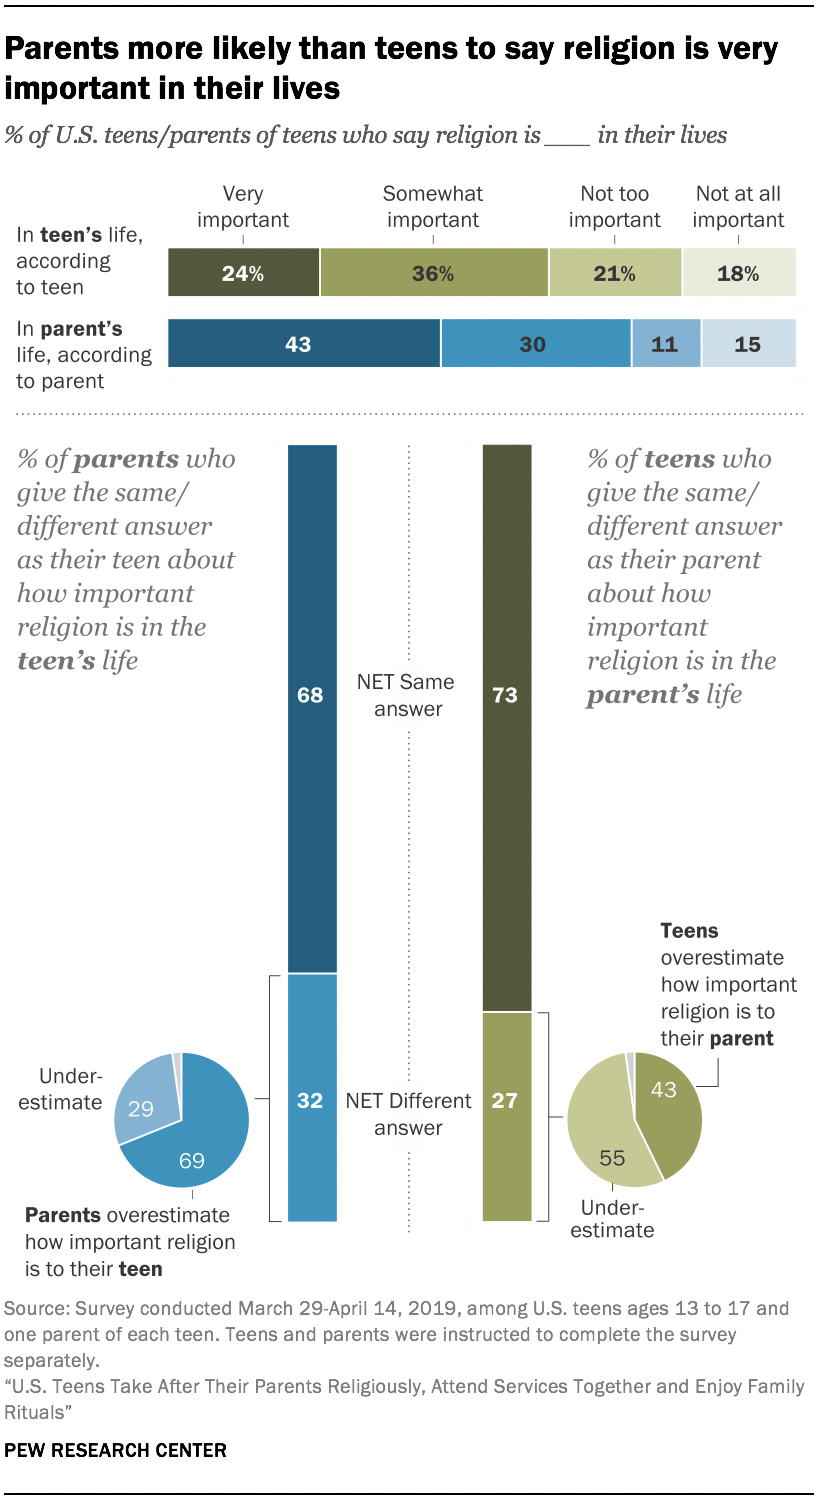 Parents more likely than teens to say religion is very important in their lives